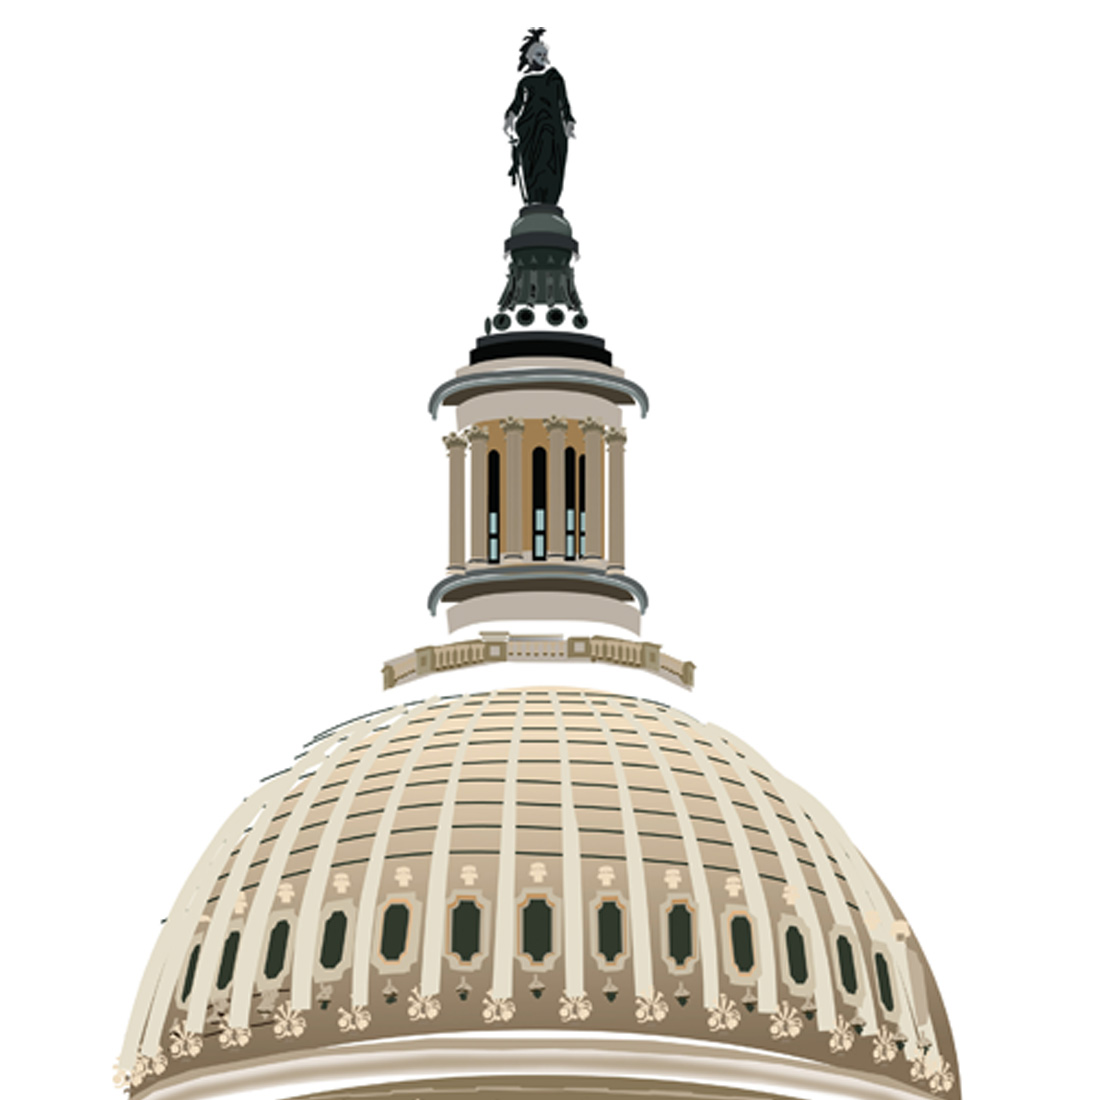 This is a illustration of USA CAPITOL DOME preview image.